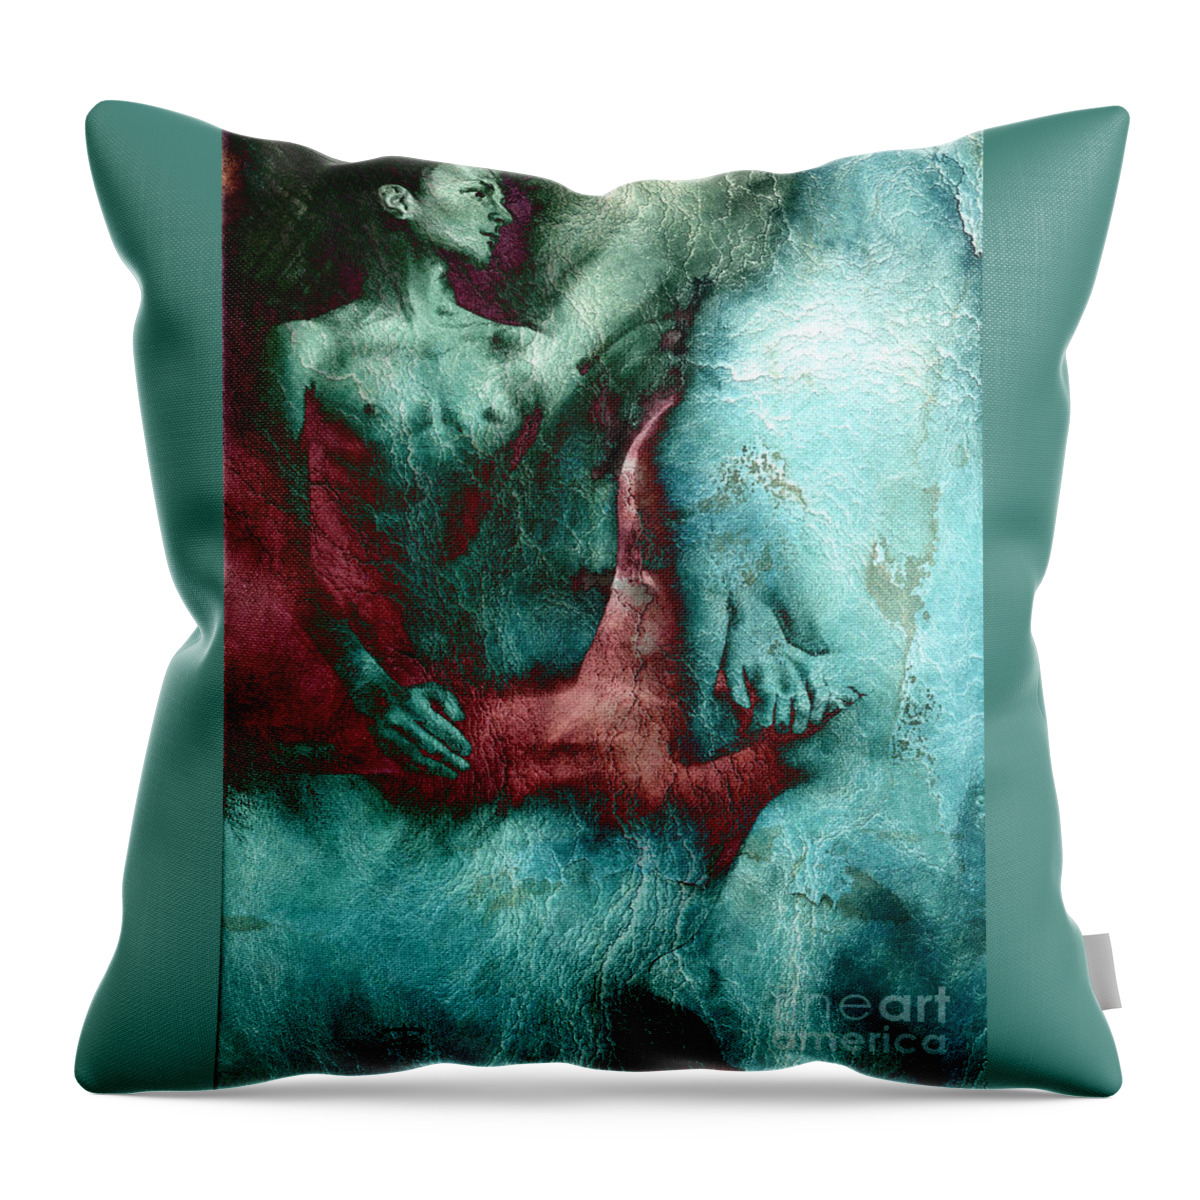 Figurative Throw Pillow featuring the digital art Dylan with Mood Texture by Paul Davenport